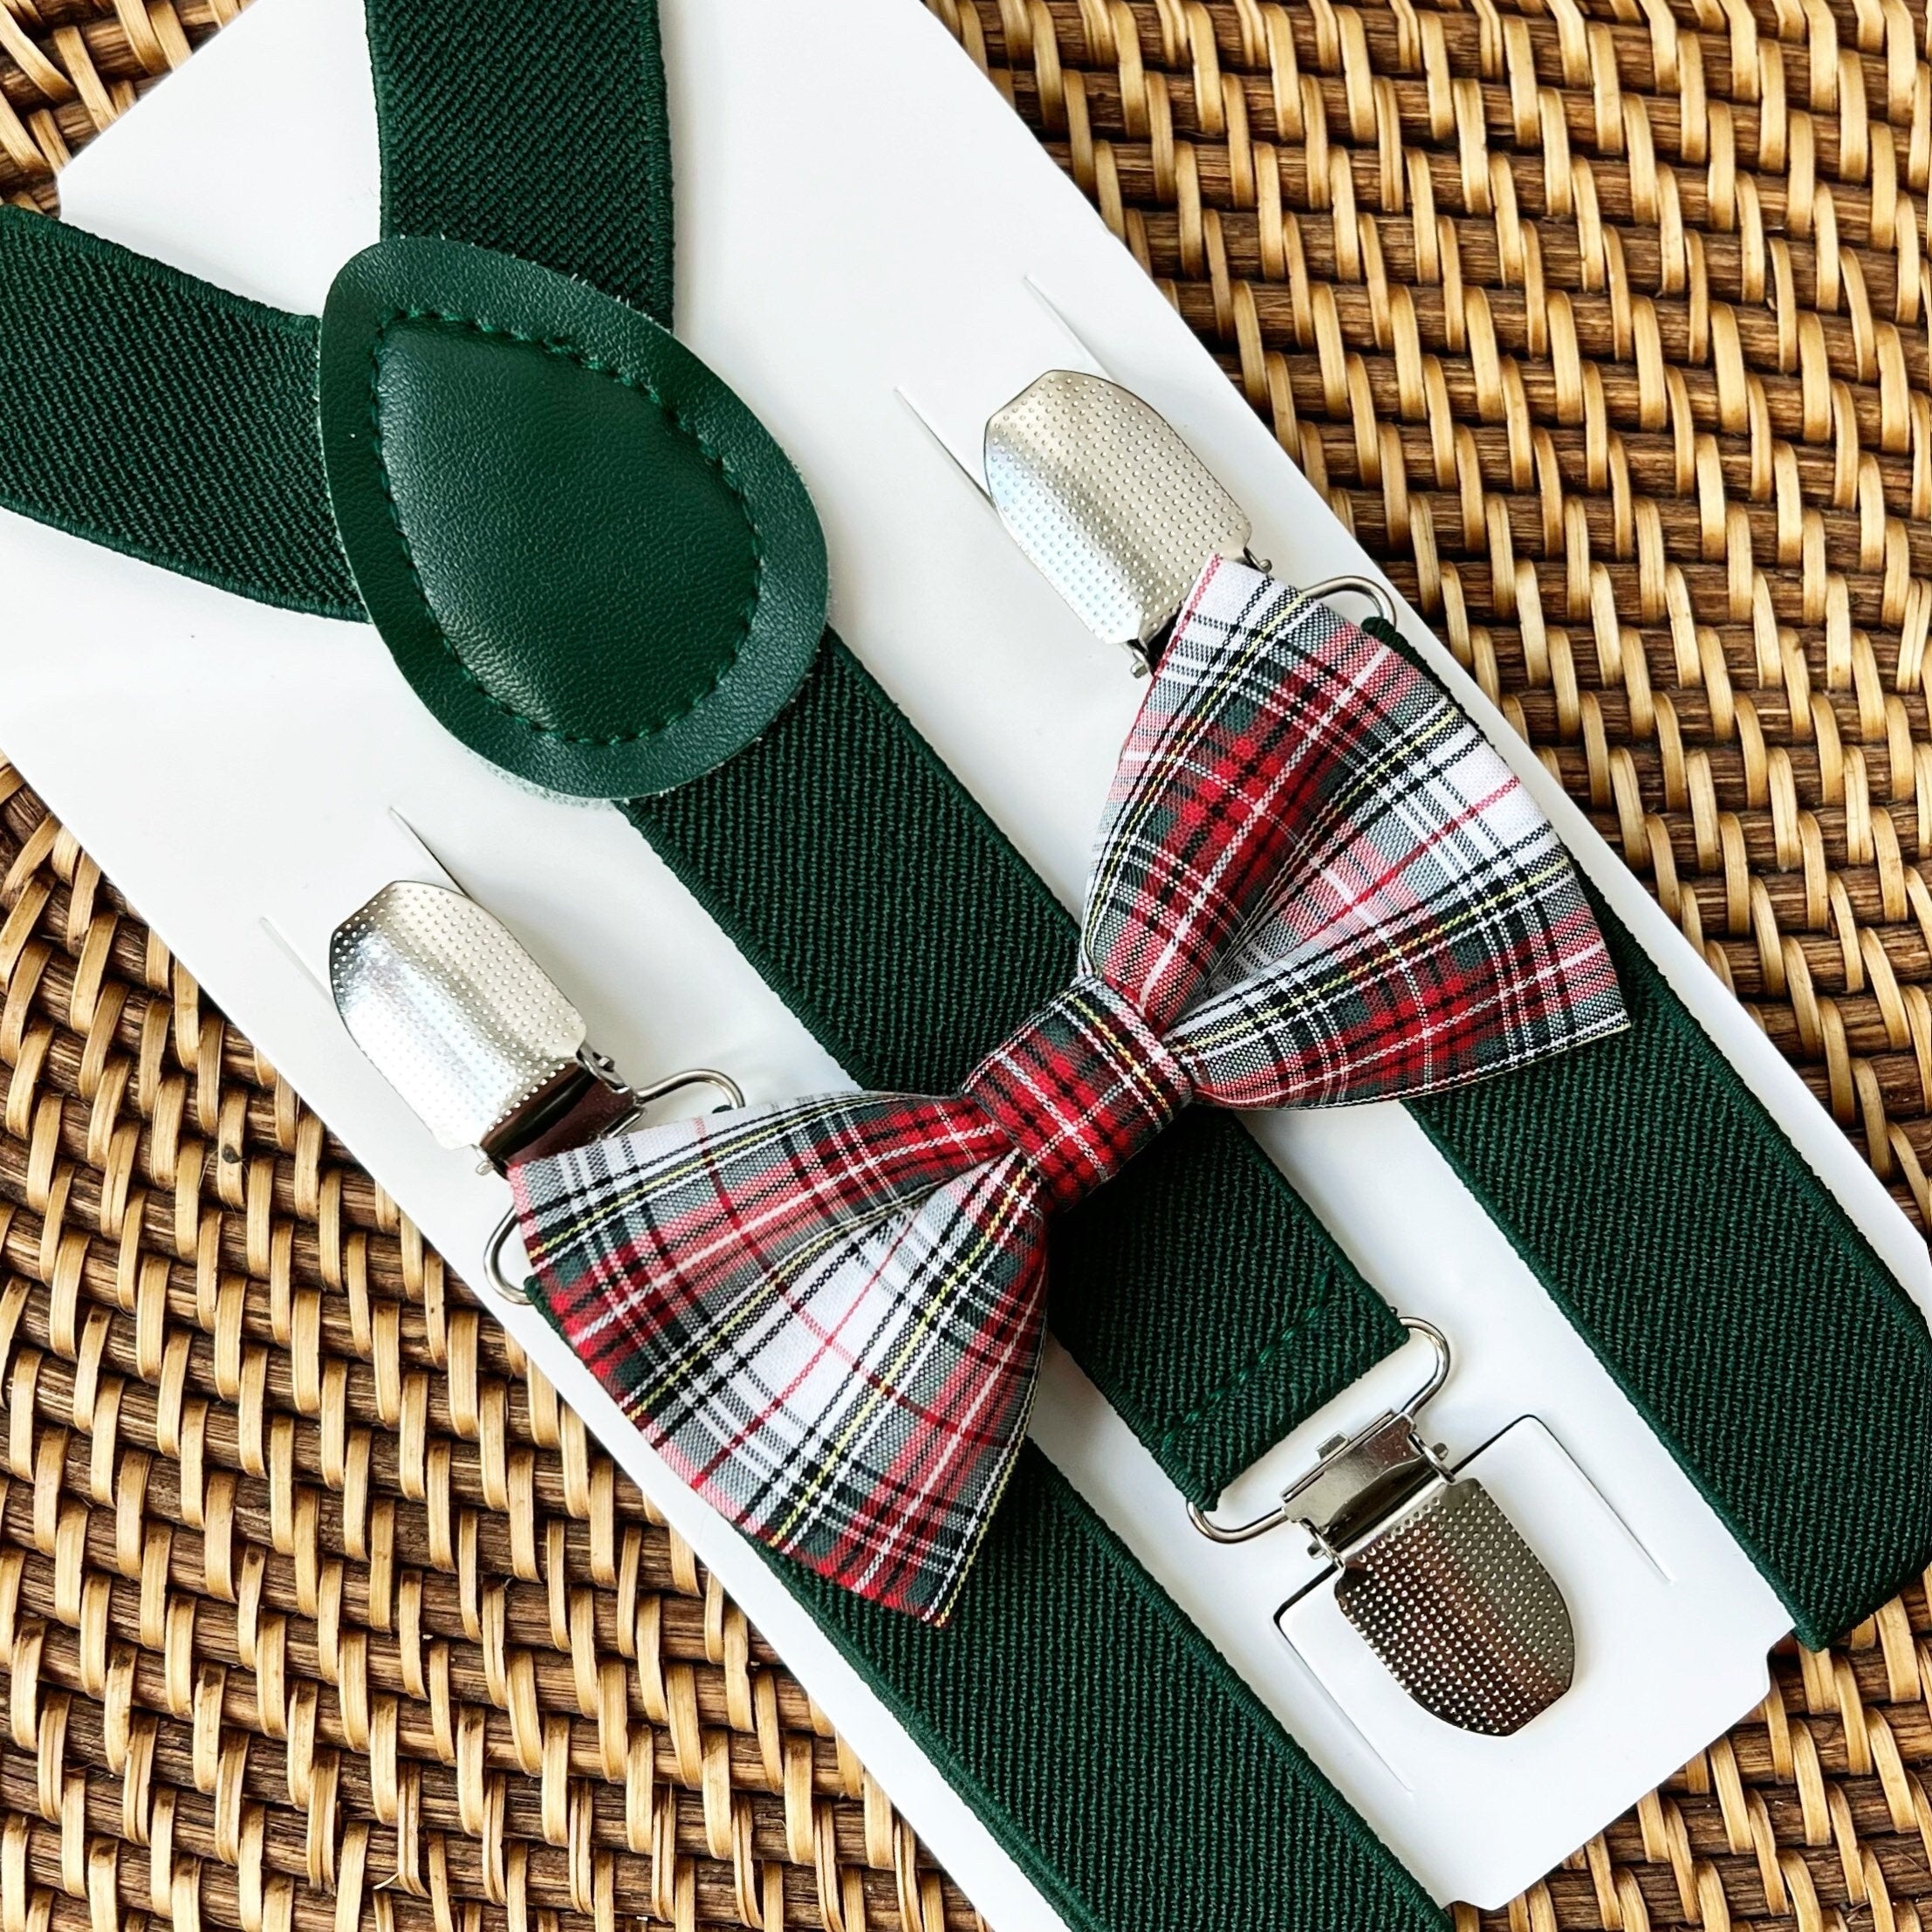 Red Green Plaid Bow Tie & Green Suspenders, Christmas Bow Tie, Outfit for Boys, Toddler Suspenders, Baby Bow Tie Gift, Bow Ties for Men